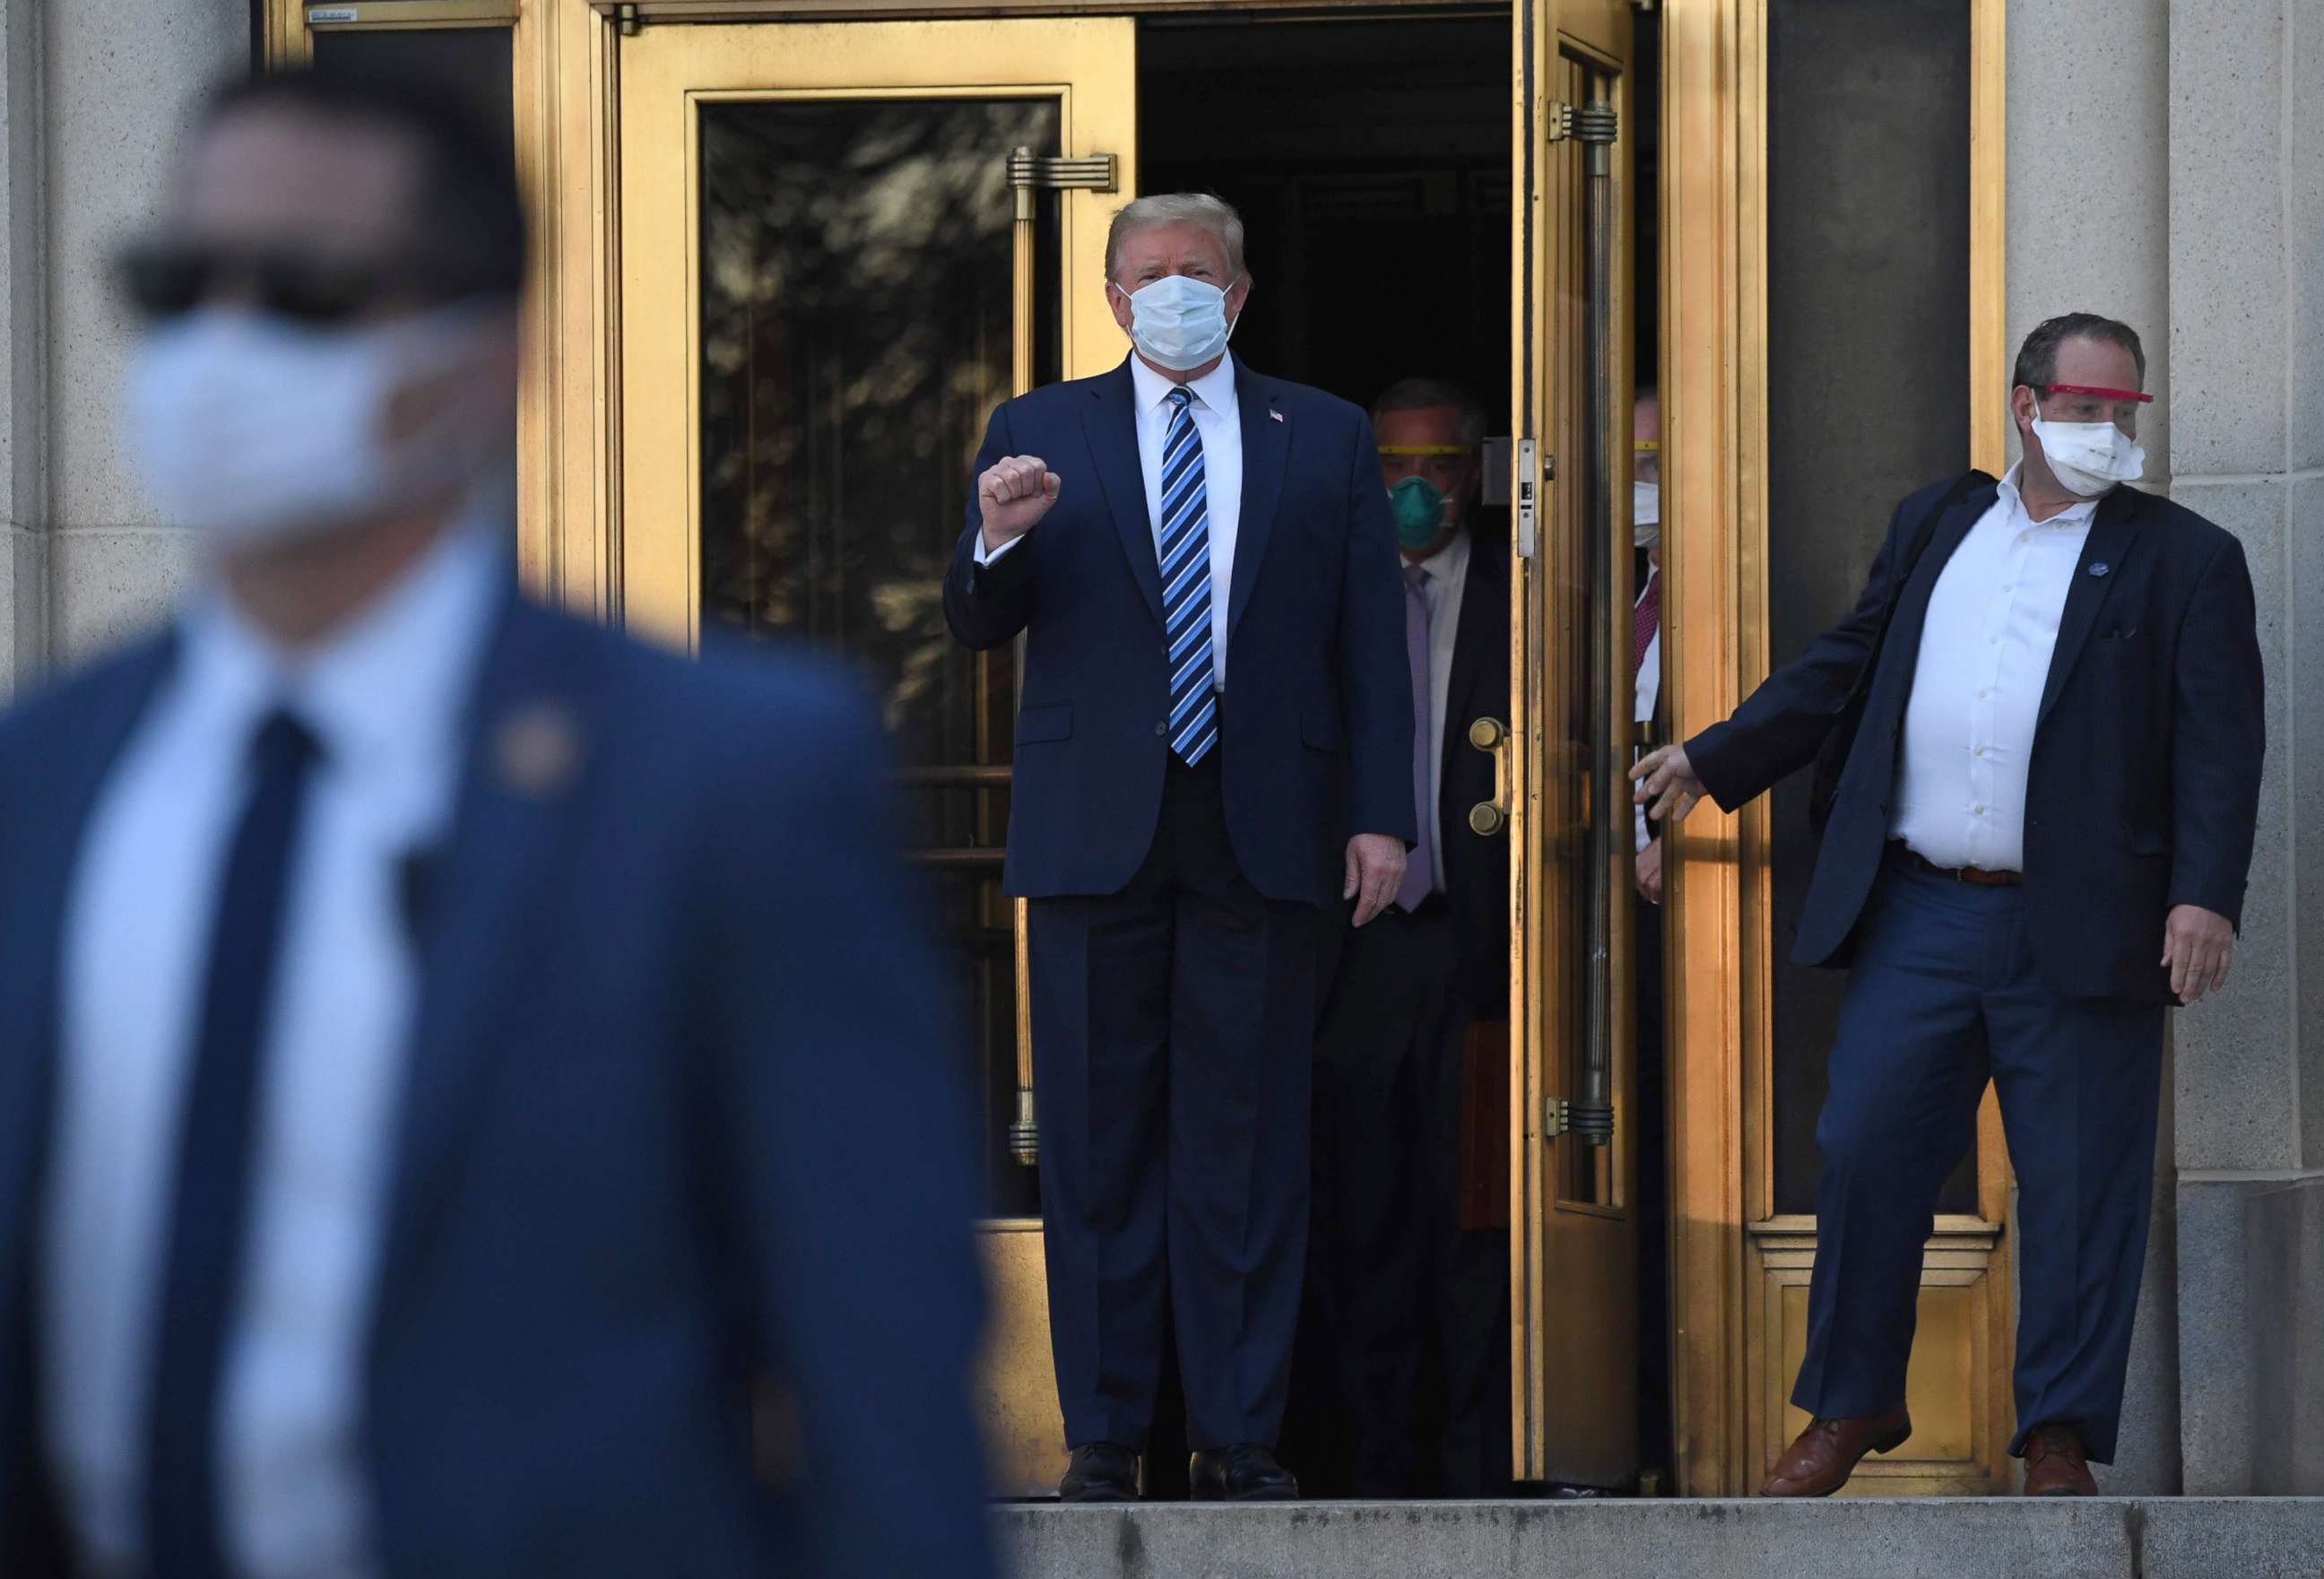 PHOTO: President Donald Trump pumps his fist as he walks out of Walter Reed Medical Center in Bethesda, Md., Oct. 5, 2020, to return to the White House after being discharged.